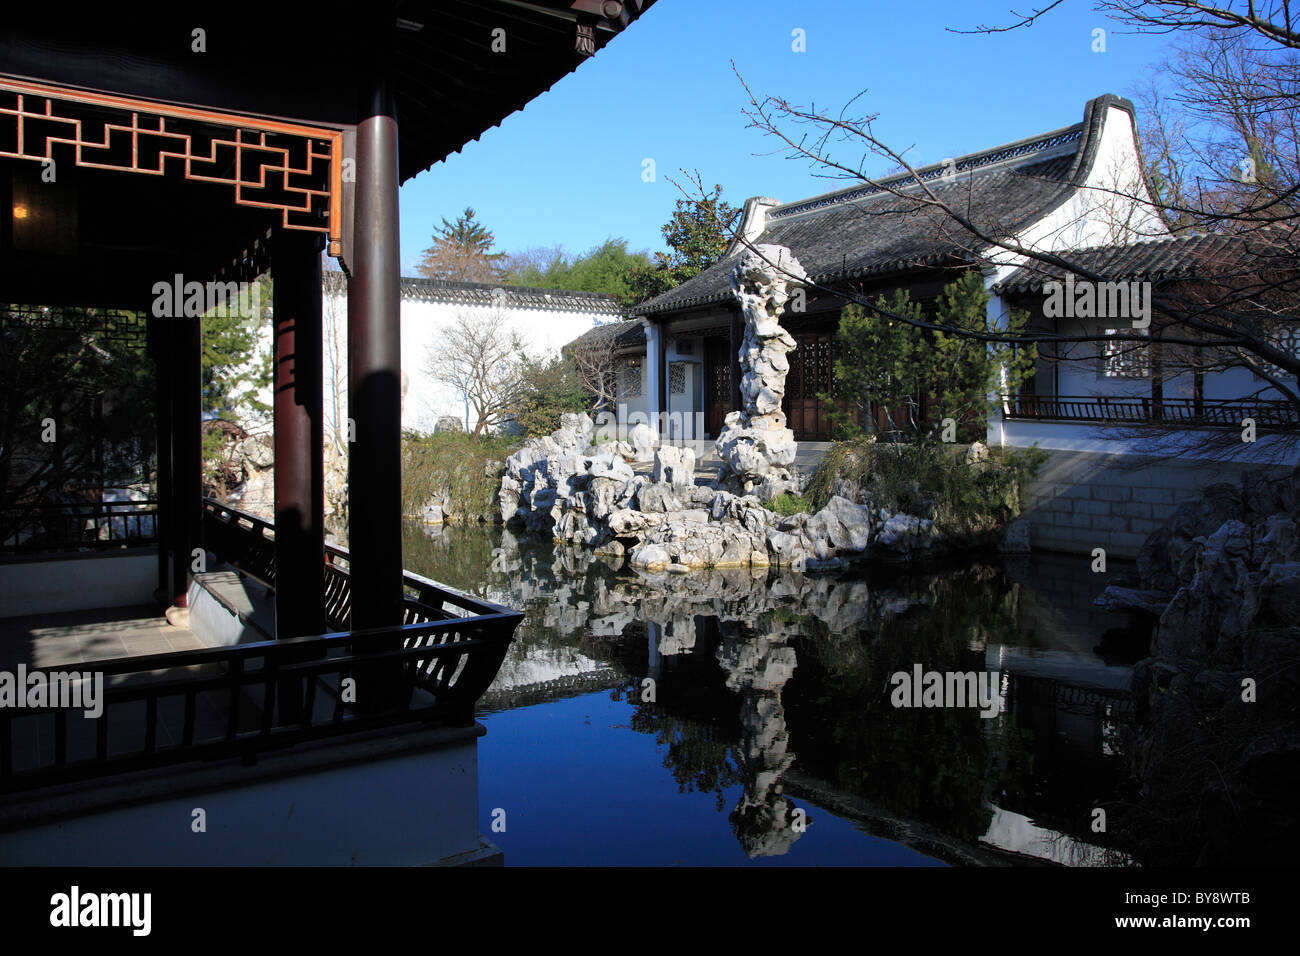 Chinese Scholar S Garden Snug Harbor Cultural Center And